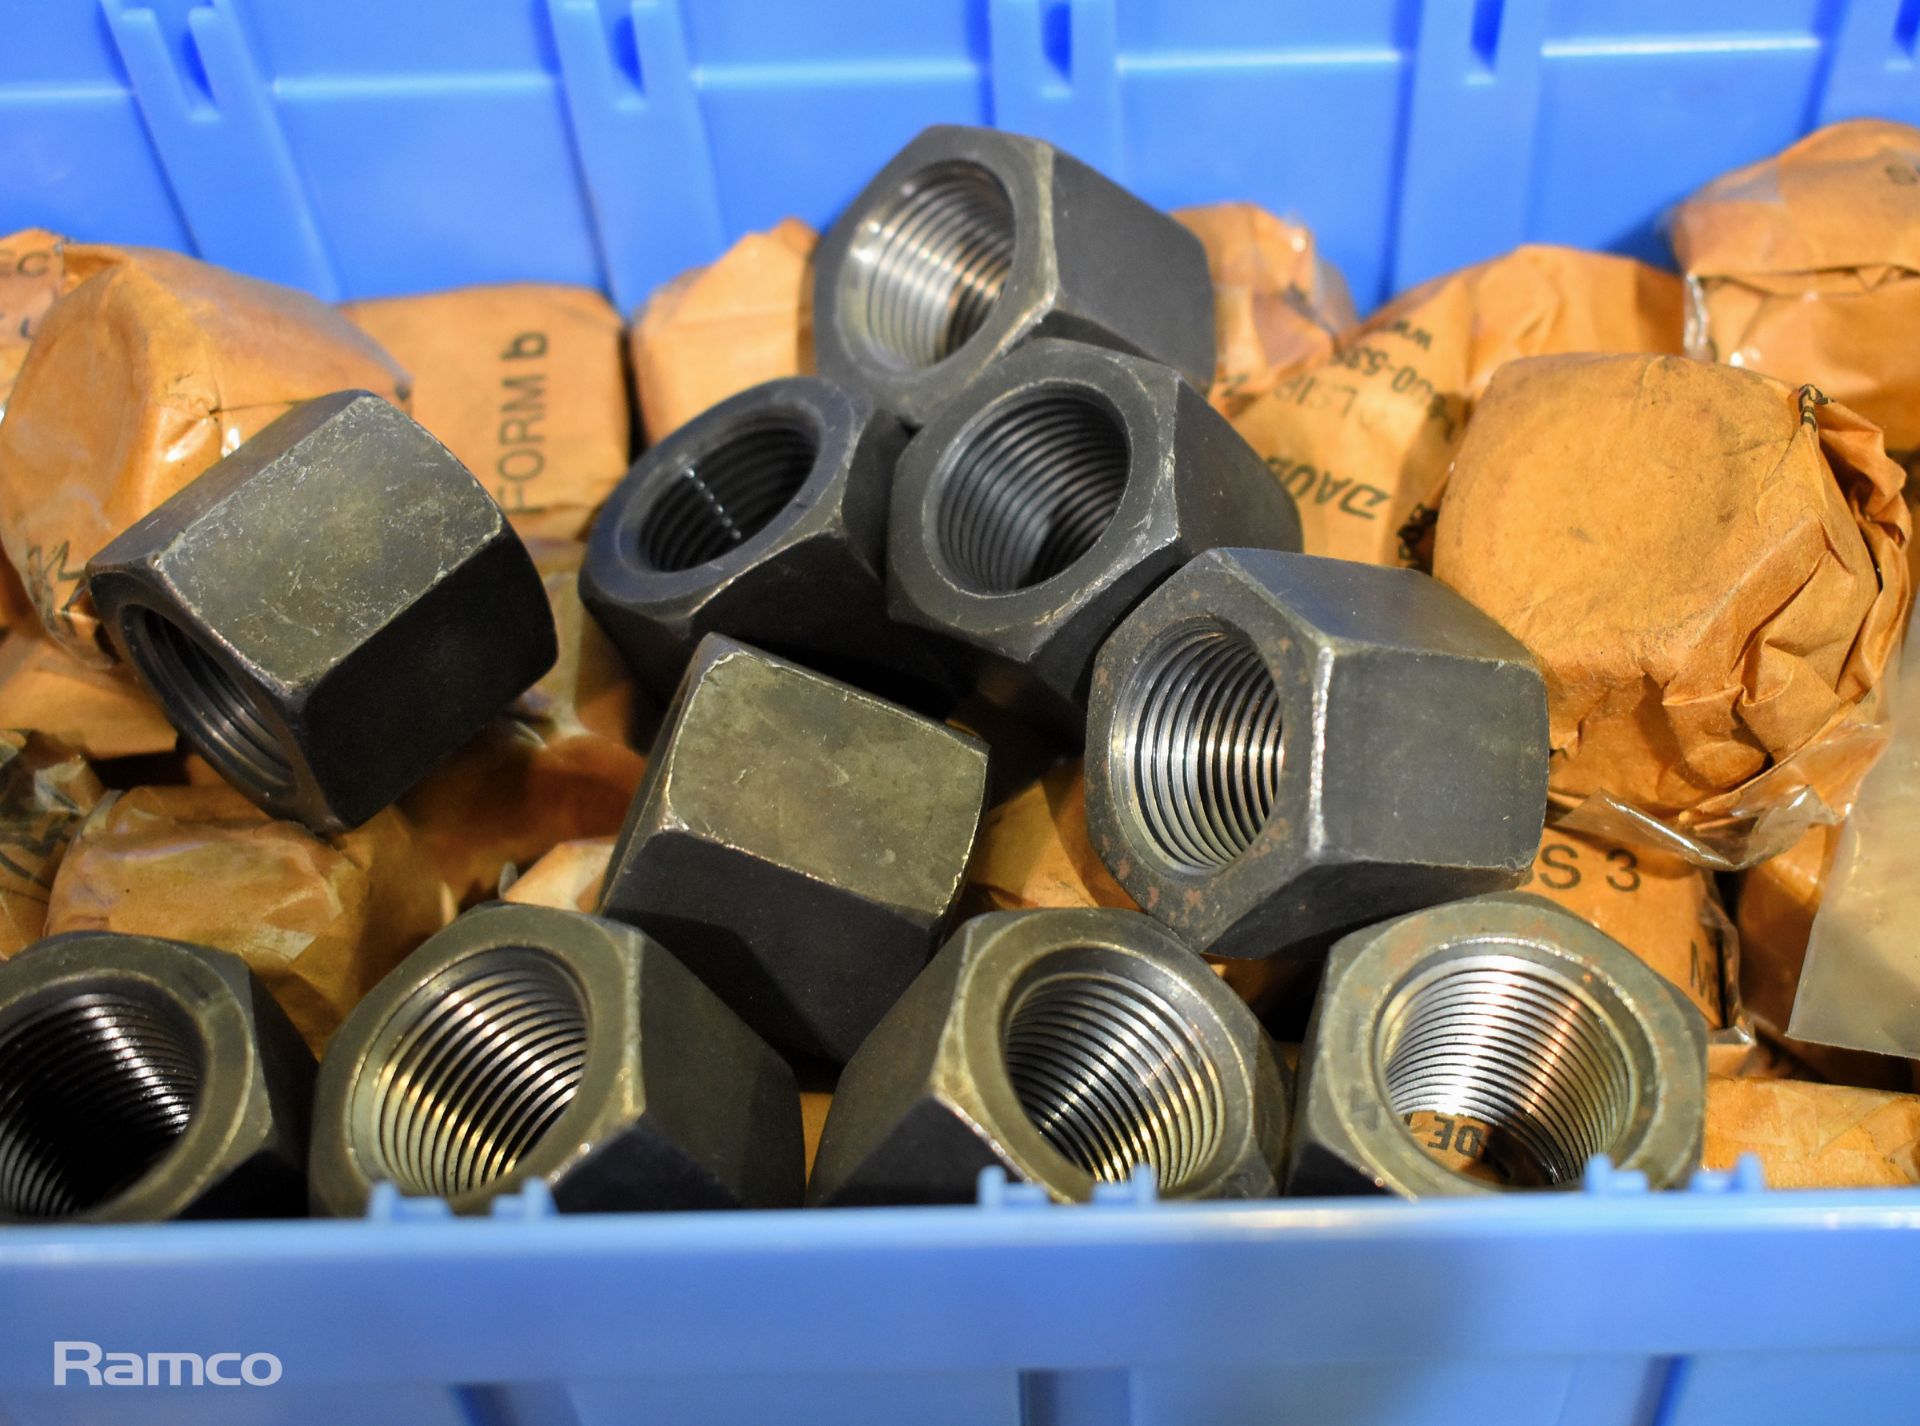 7/8-14 GR8 right hand thread uncoated nuts - approx 100, 3x Murex Saffire welding torch adaptors - Image 2 of 6